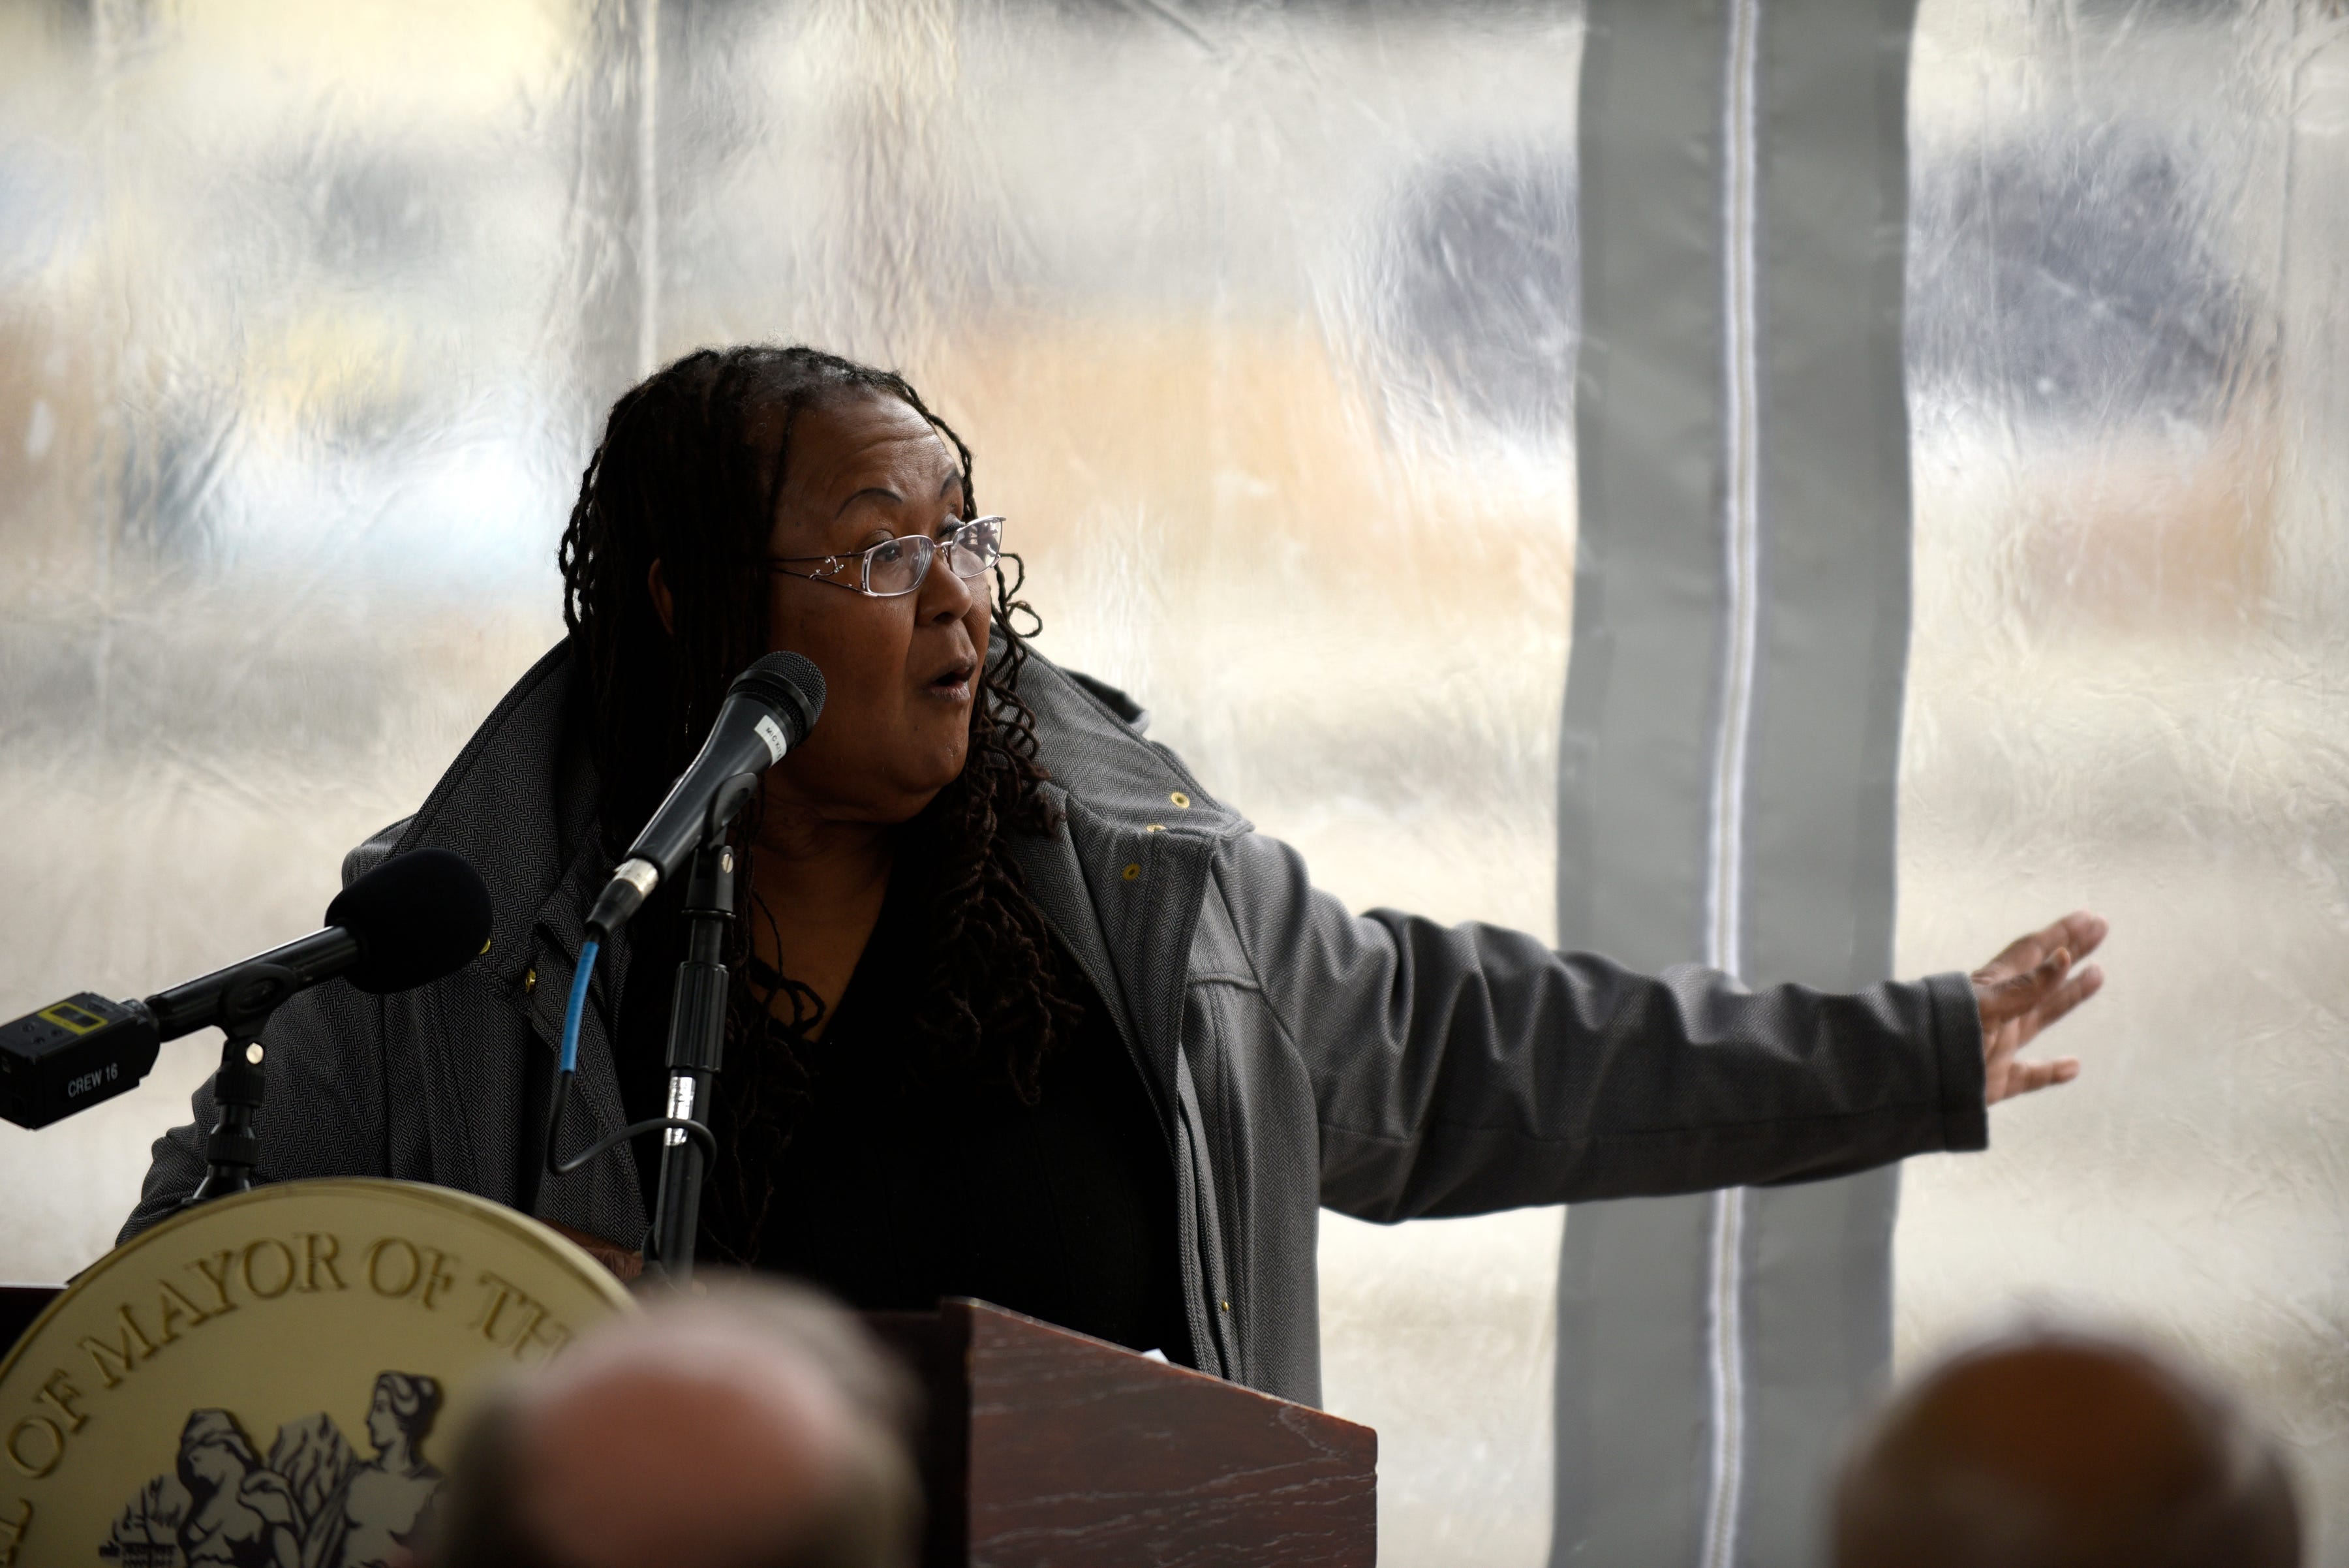 Rev. Cynthia Lowe of the Paveway Neighborhood Association, speaks during a press conference at the former headquarters of the American Motor Corporation, 14250 Plymouth Road, Detroit, Thursday, Dec. 9, 2021.